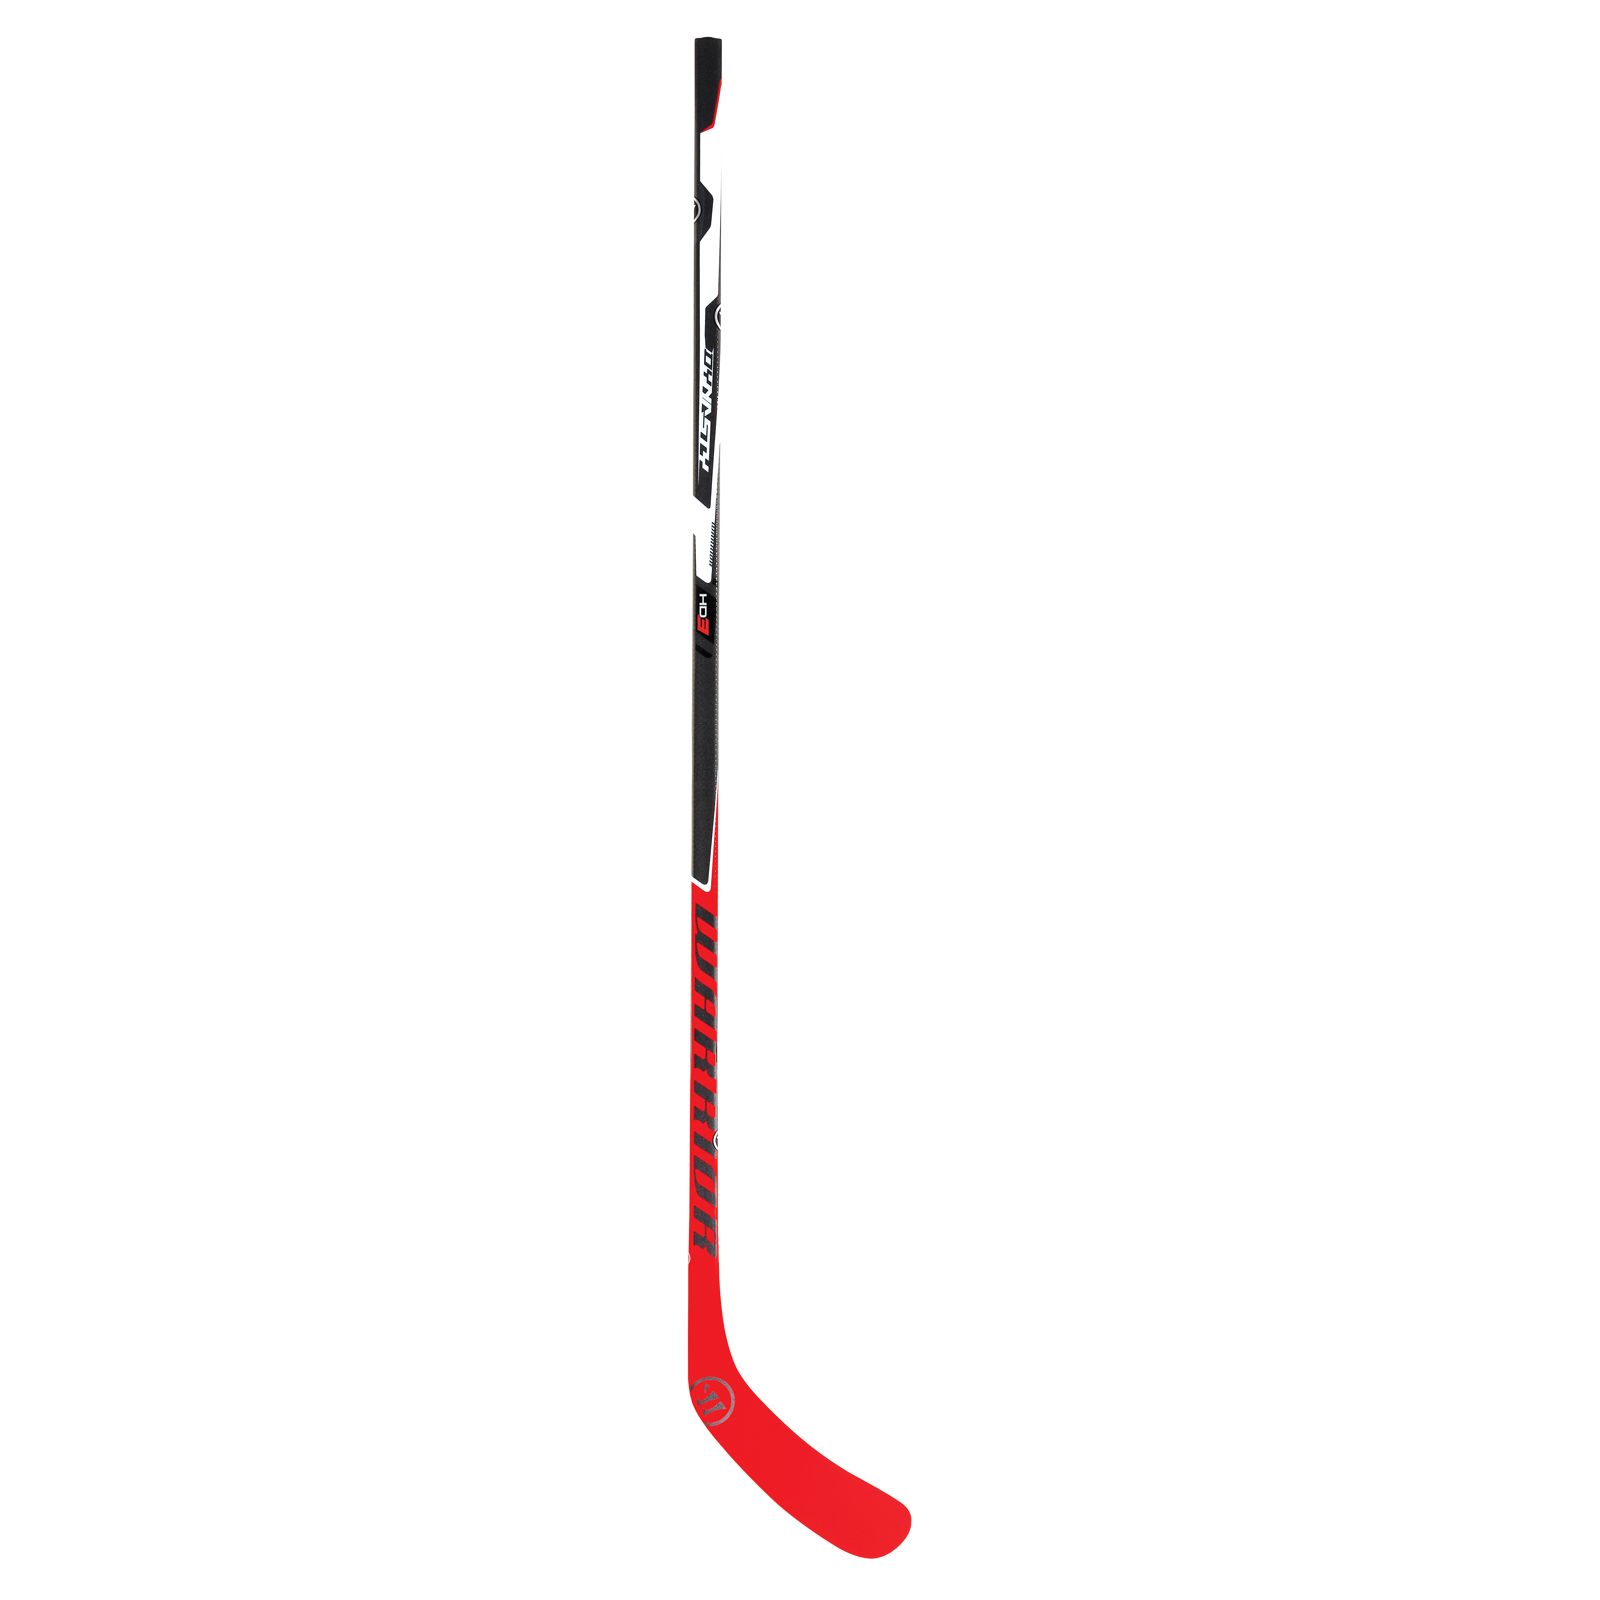 DYNASTY HD3 INTERMEDIATE GRIP HOCKEY STICK, Black with White & Red image number 1